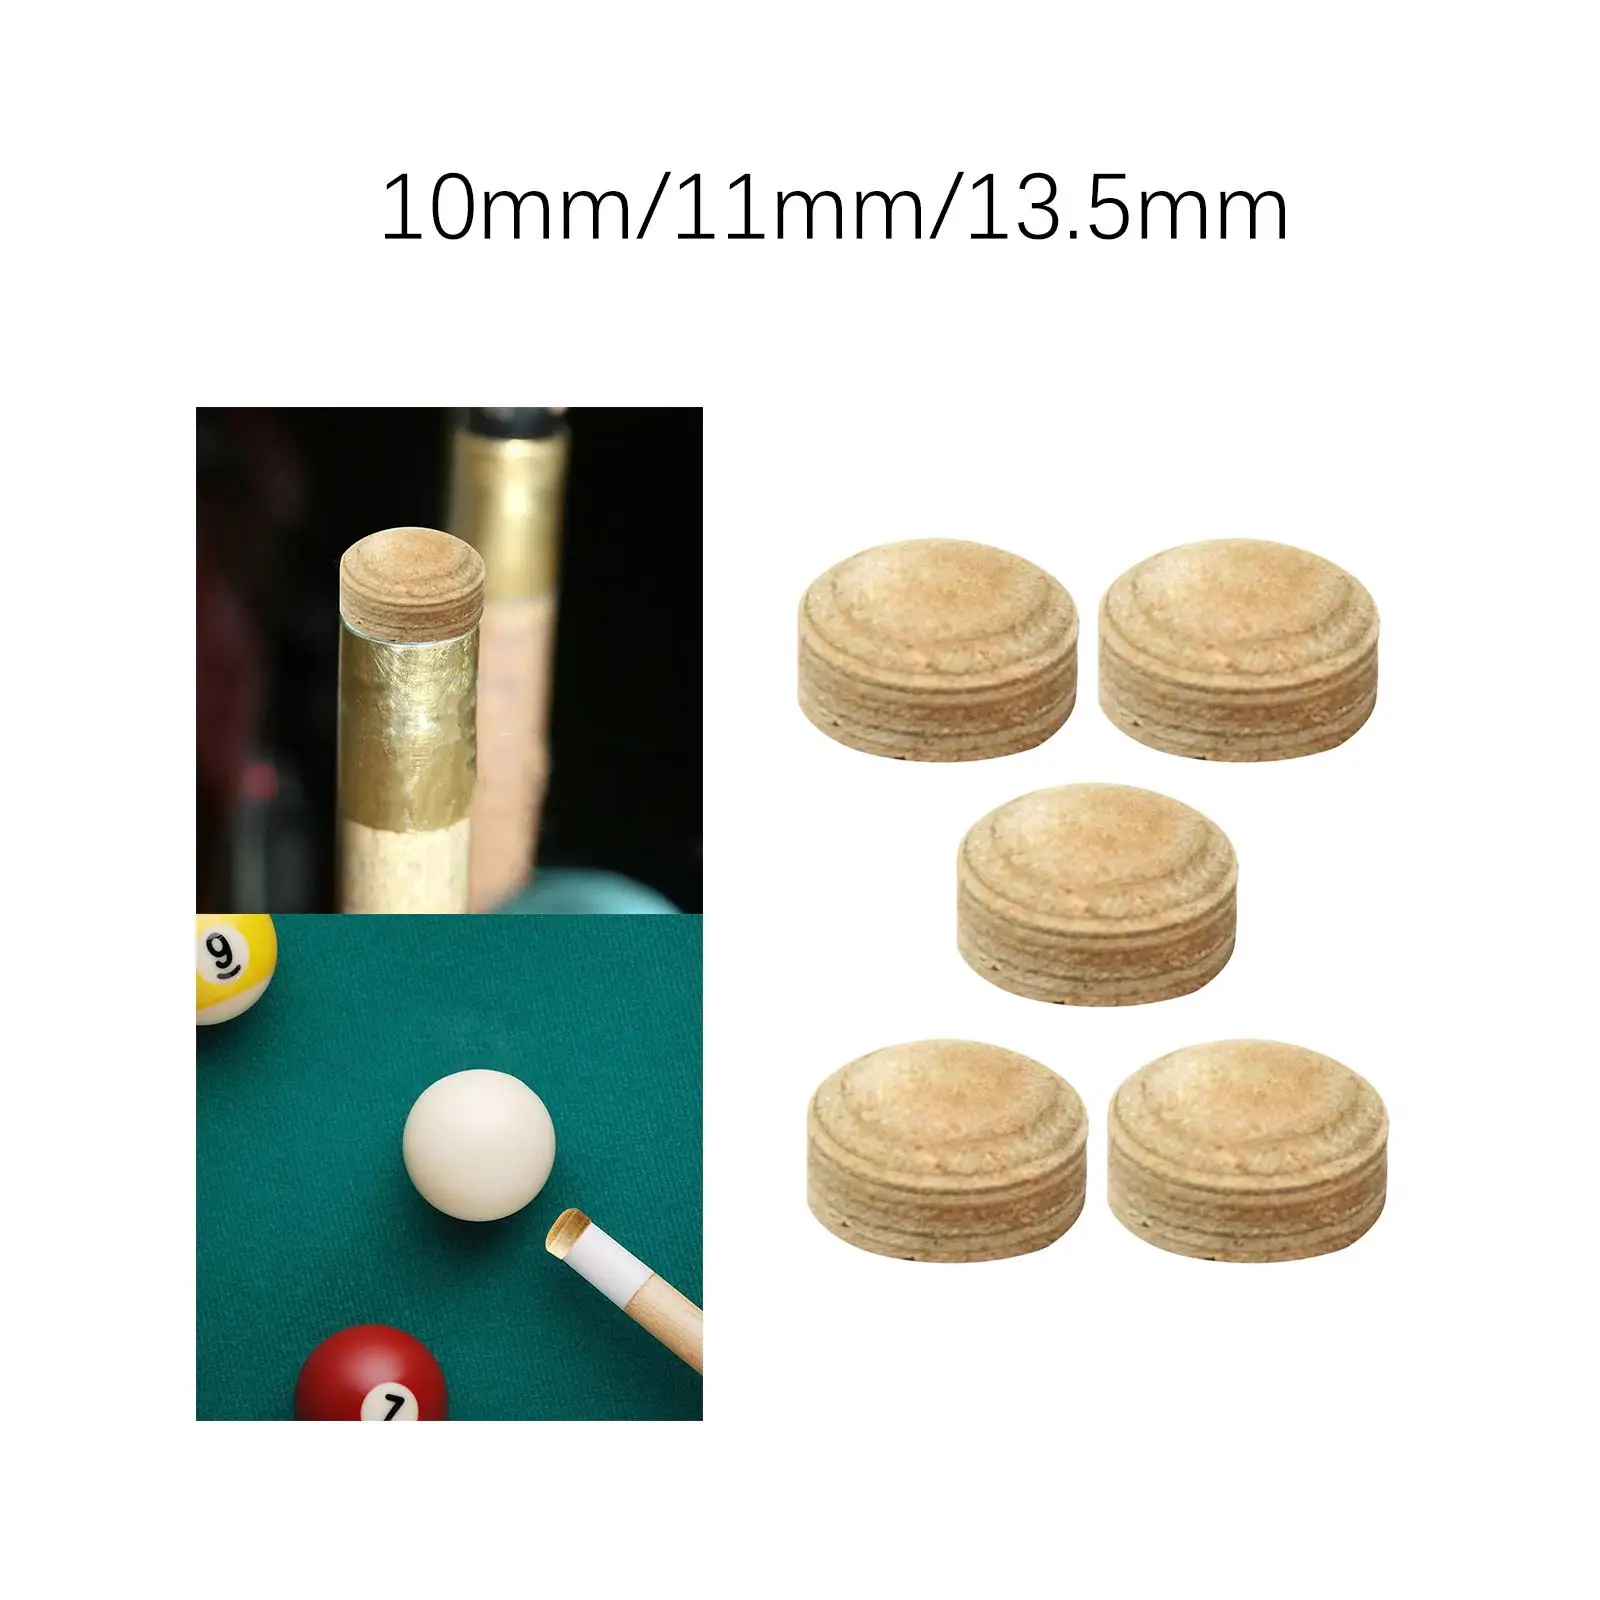 5 Pieces Billiard Cue Tips 9 Balls, 8 Balls Multiple Layer End Tips Pool Cue Stick Tips for Personal Use Home Billiards Room